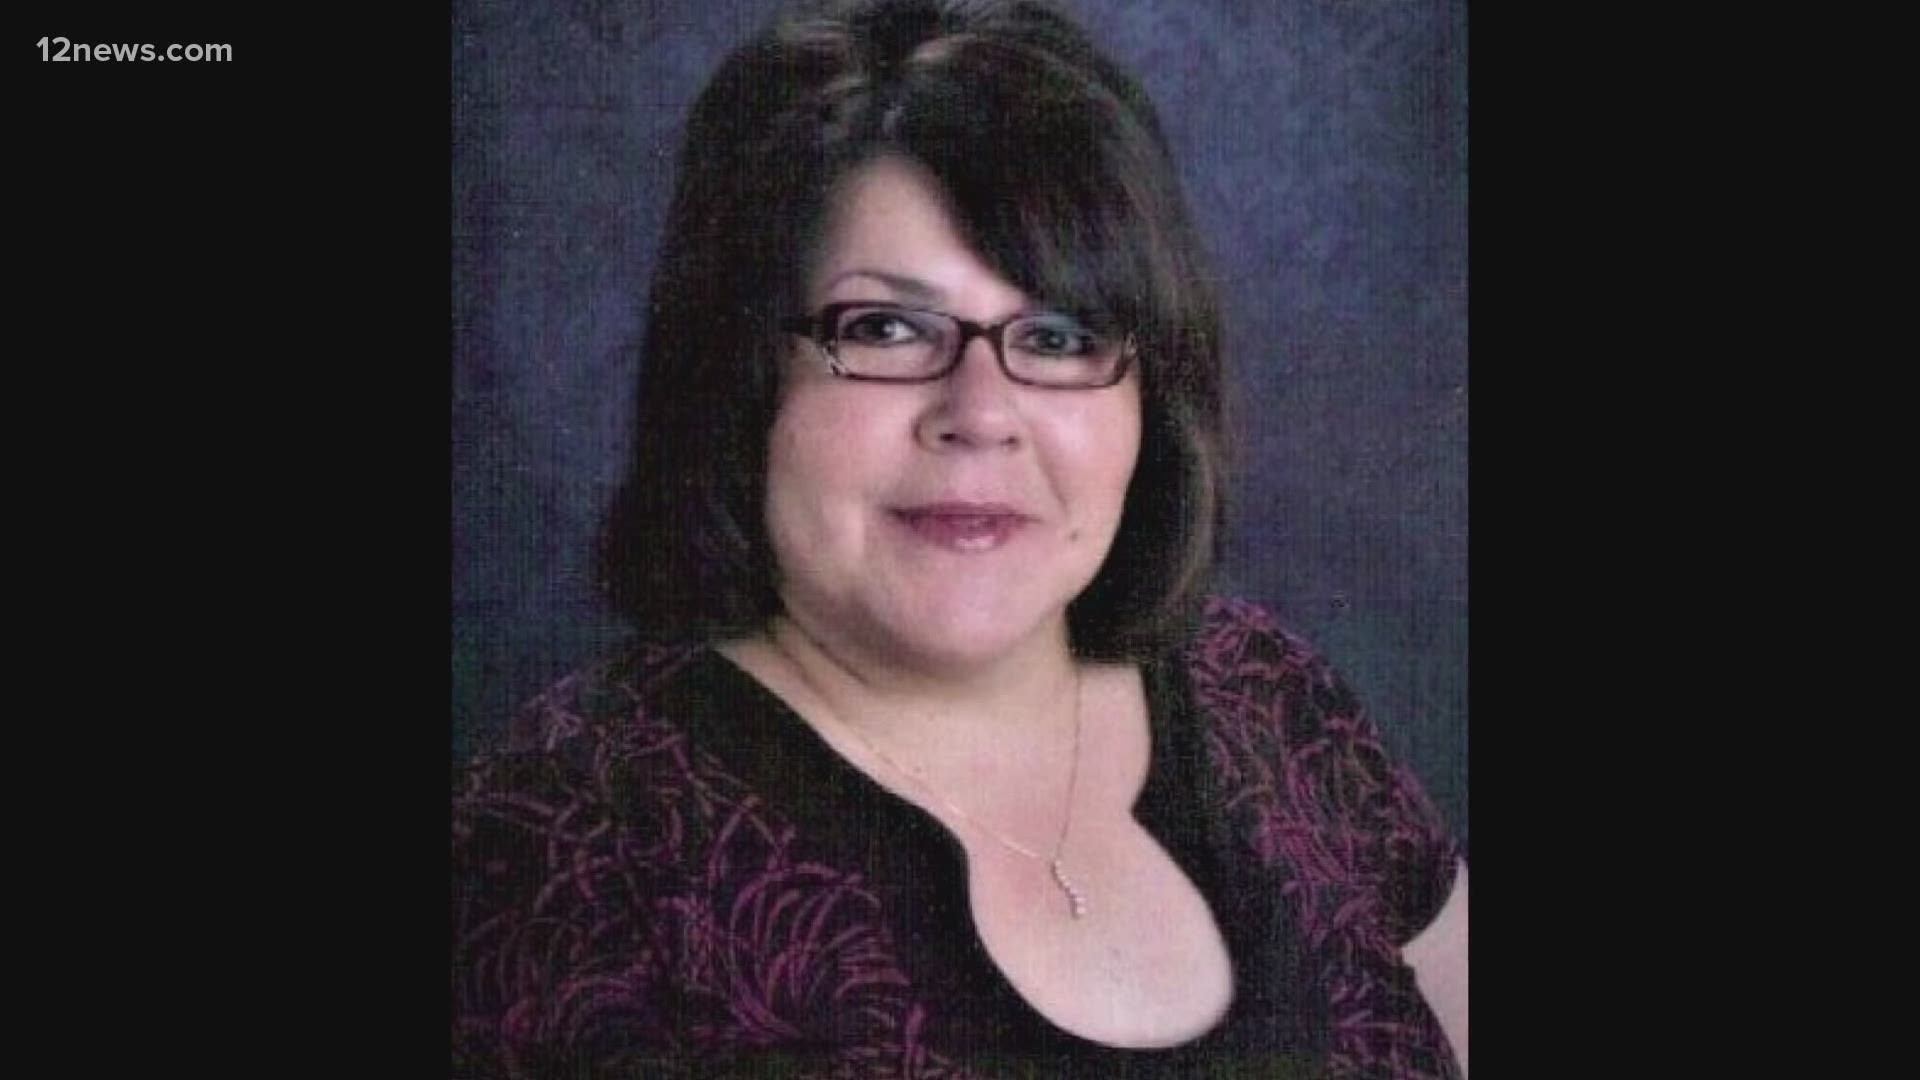 Kimberly Byrd was a beloved first-grade teacher in Southern Arizona. She lost her battle with COVID-19 and may have passed it to two other teachers.